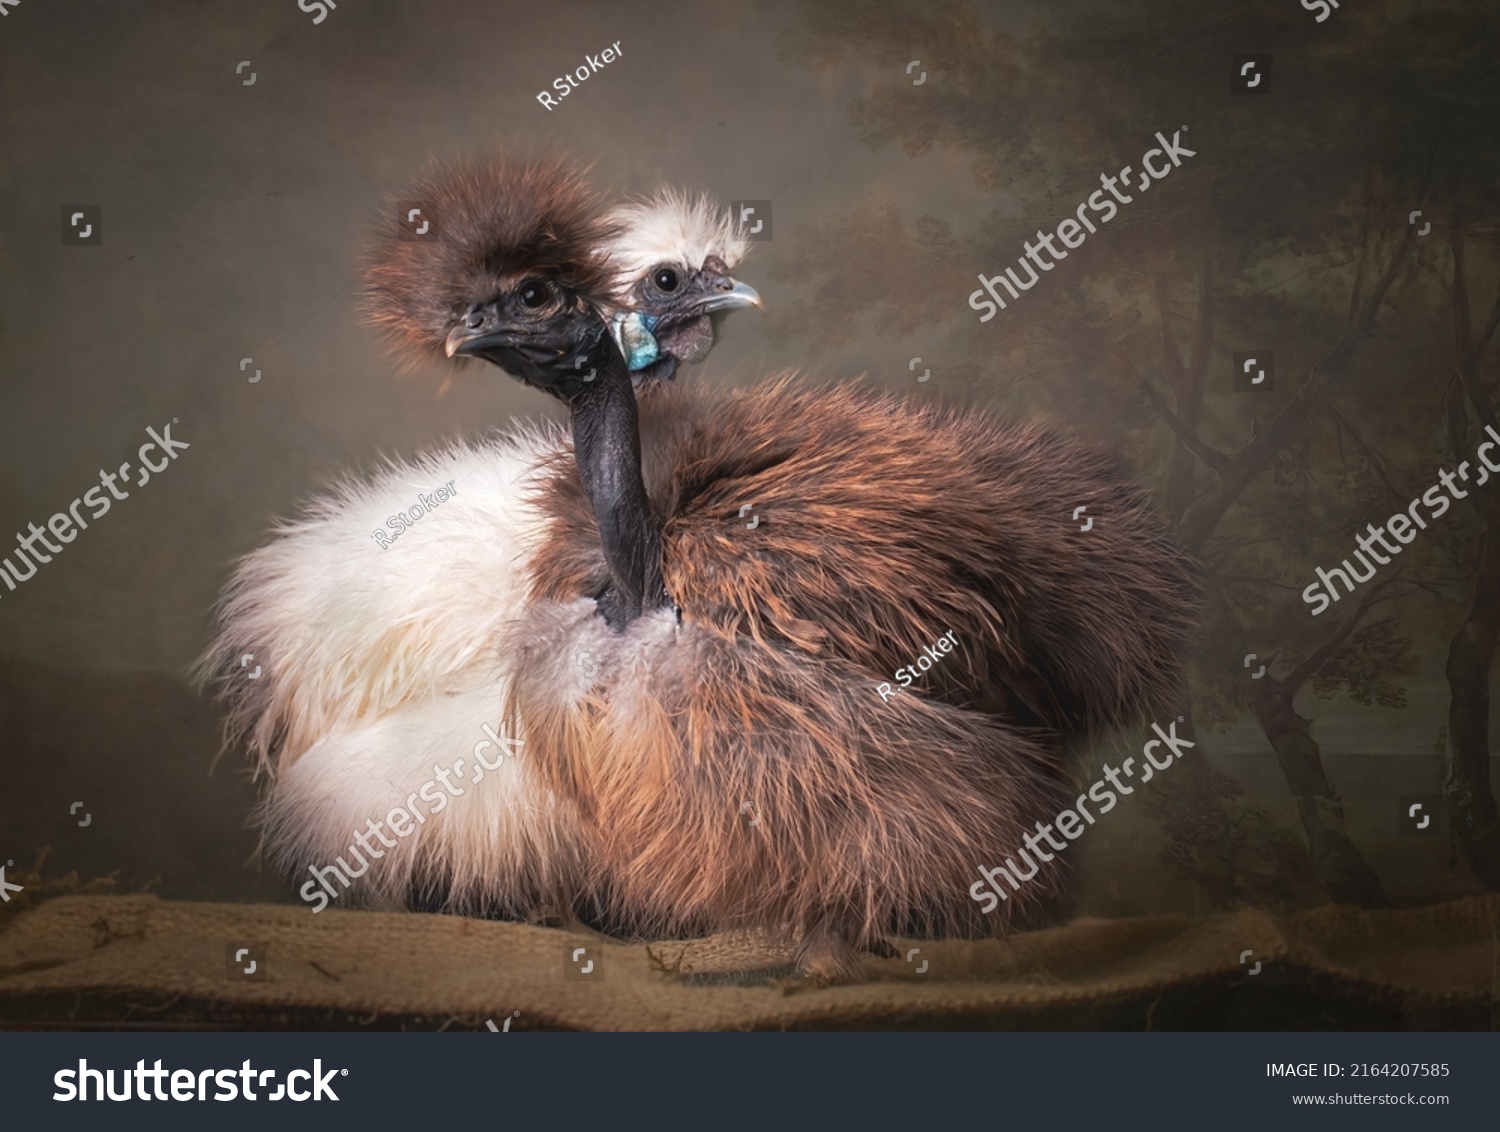 26 Silkie showgirls Images, Stock Photos & Vectors | Shutterstock